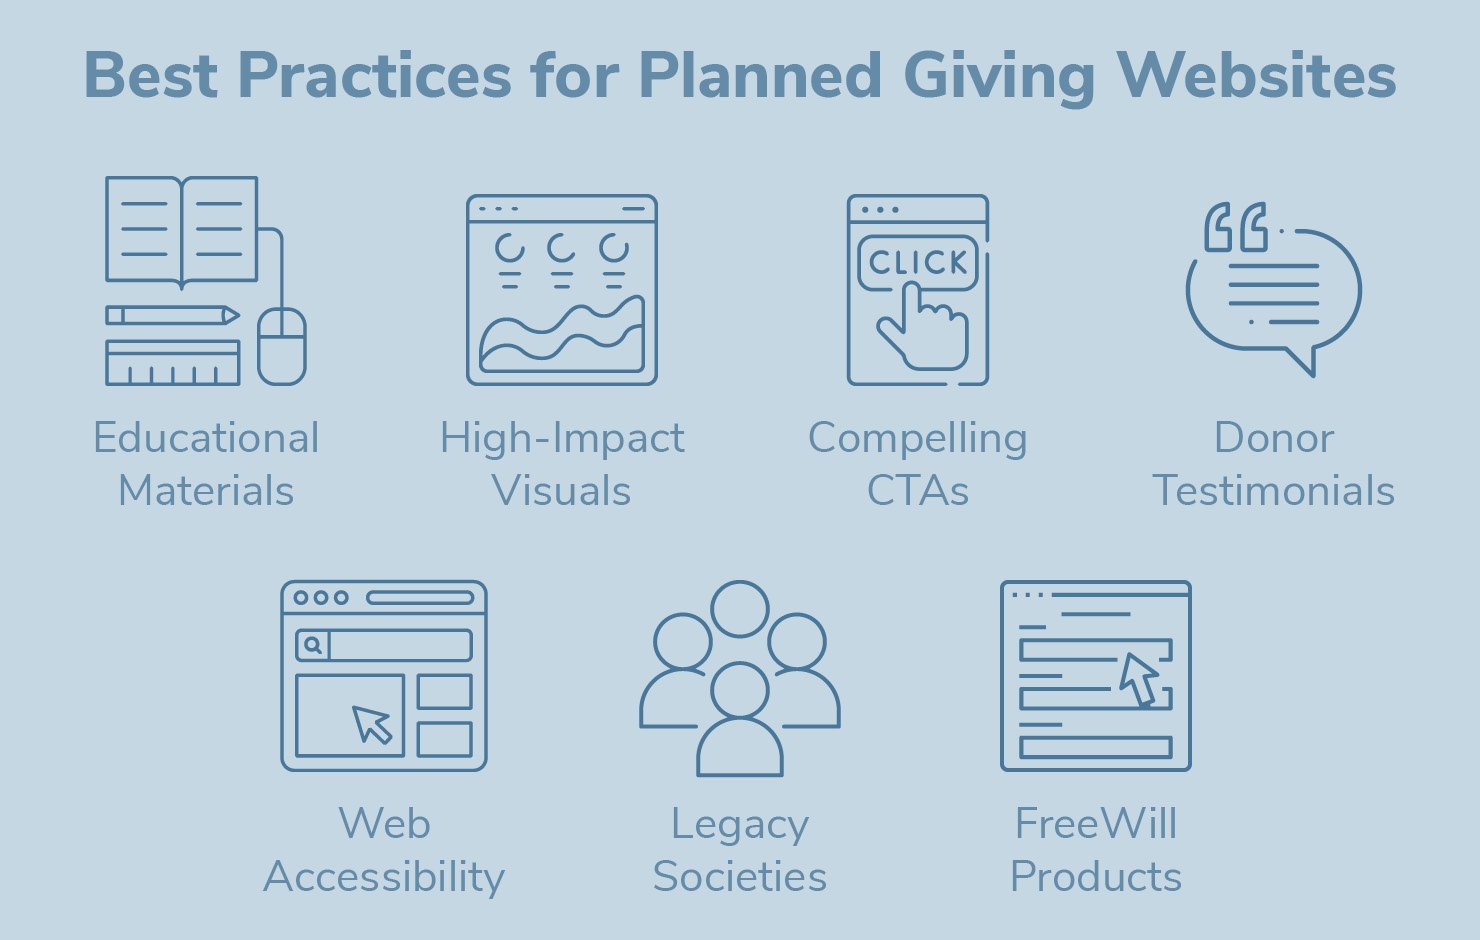 Follow these best practices to create an effective planned giving website - explained in the text below.